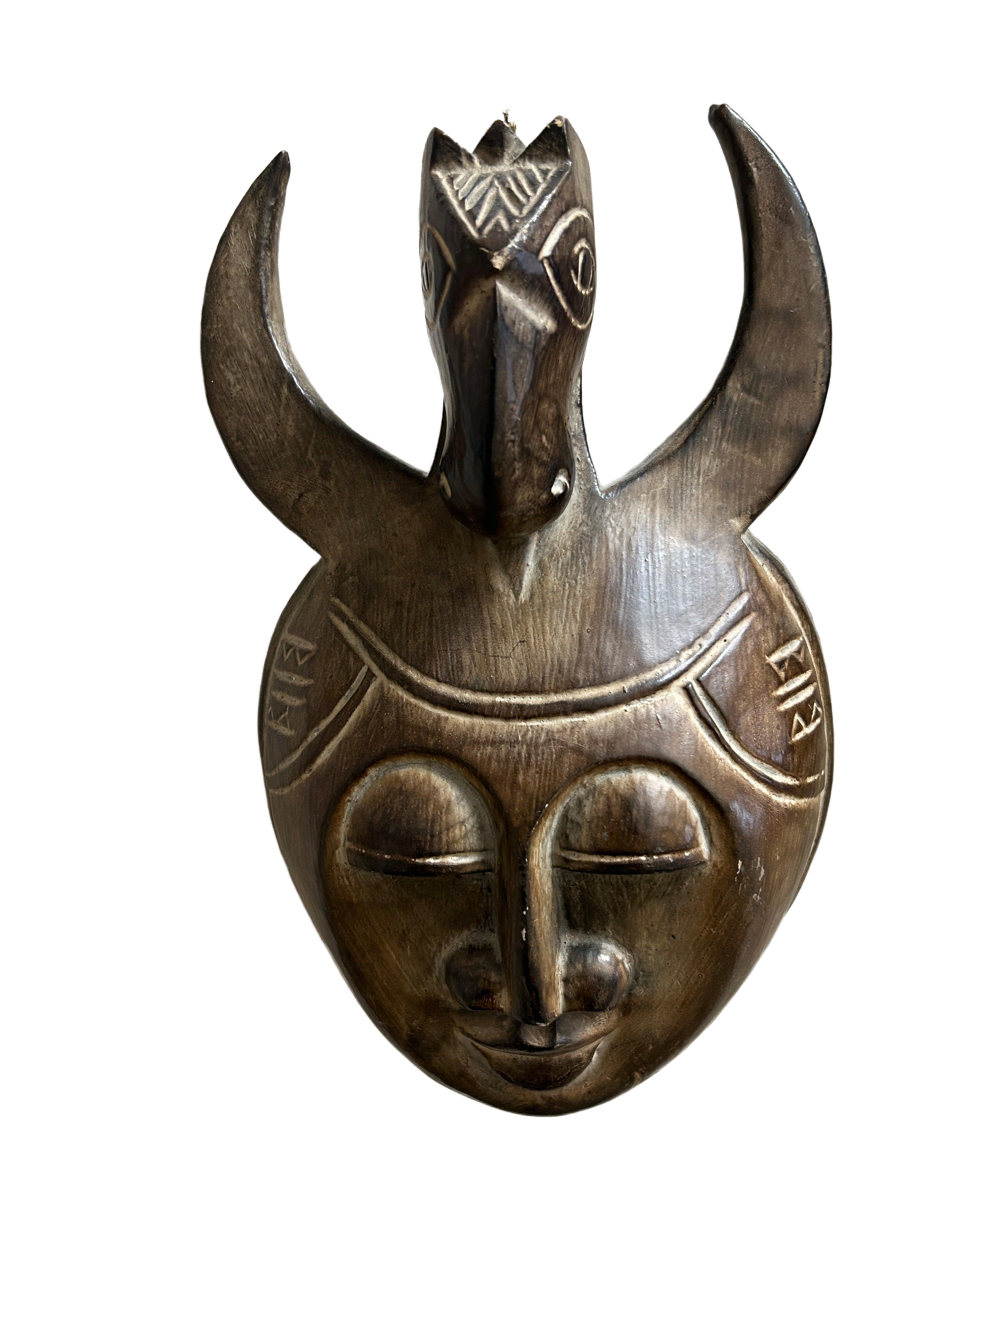 This wood-crafted Art Mask, brilliantly melding metal and wood with bronze and titanium accents, functions as both a fashion accessory and an emblem of artistic expression; its handle enhances its allure, making it a treasured addition for collectors and art enthusiasts, available at the hearing clinic at Allard Audiology.